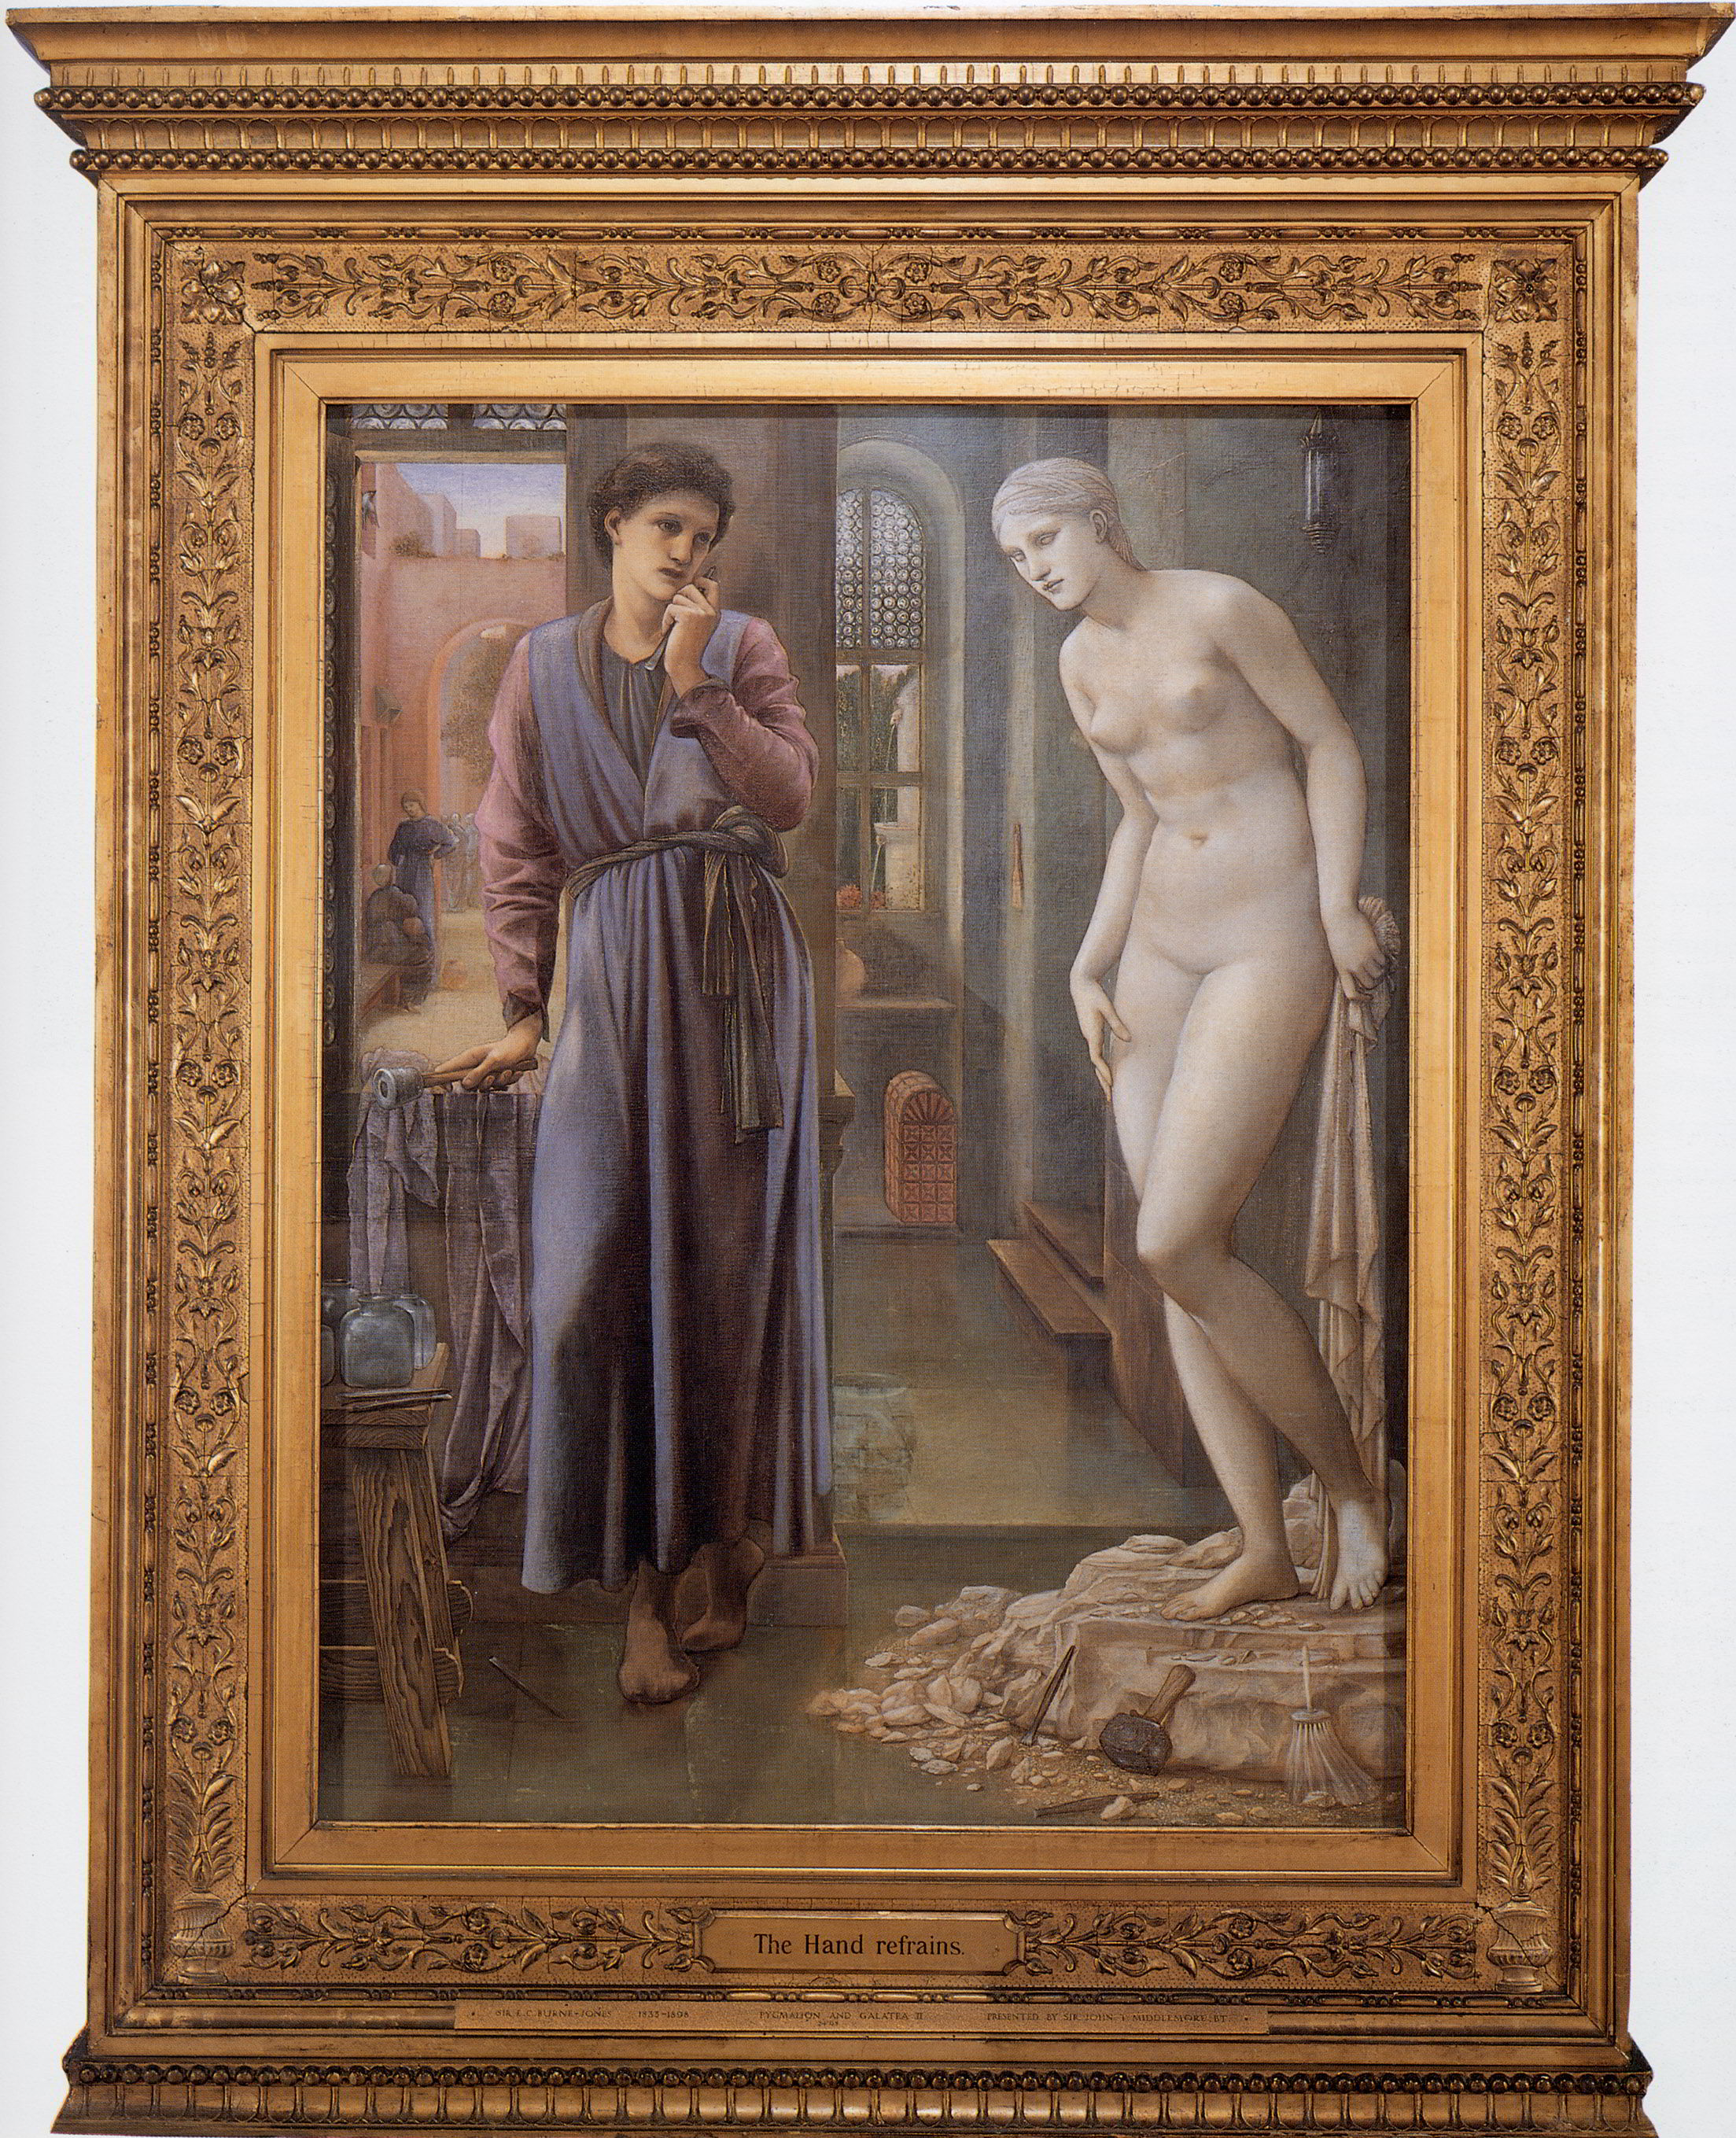 Pygmalion and the Image 2 The Hand Refrains by Edward Burne Jones